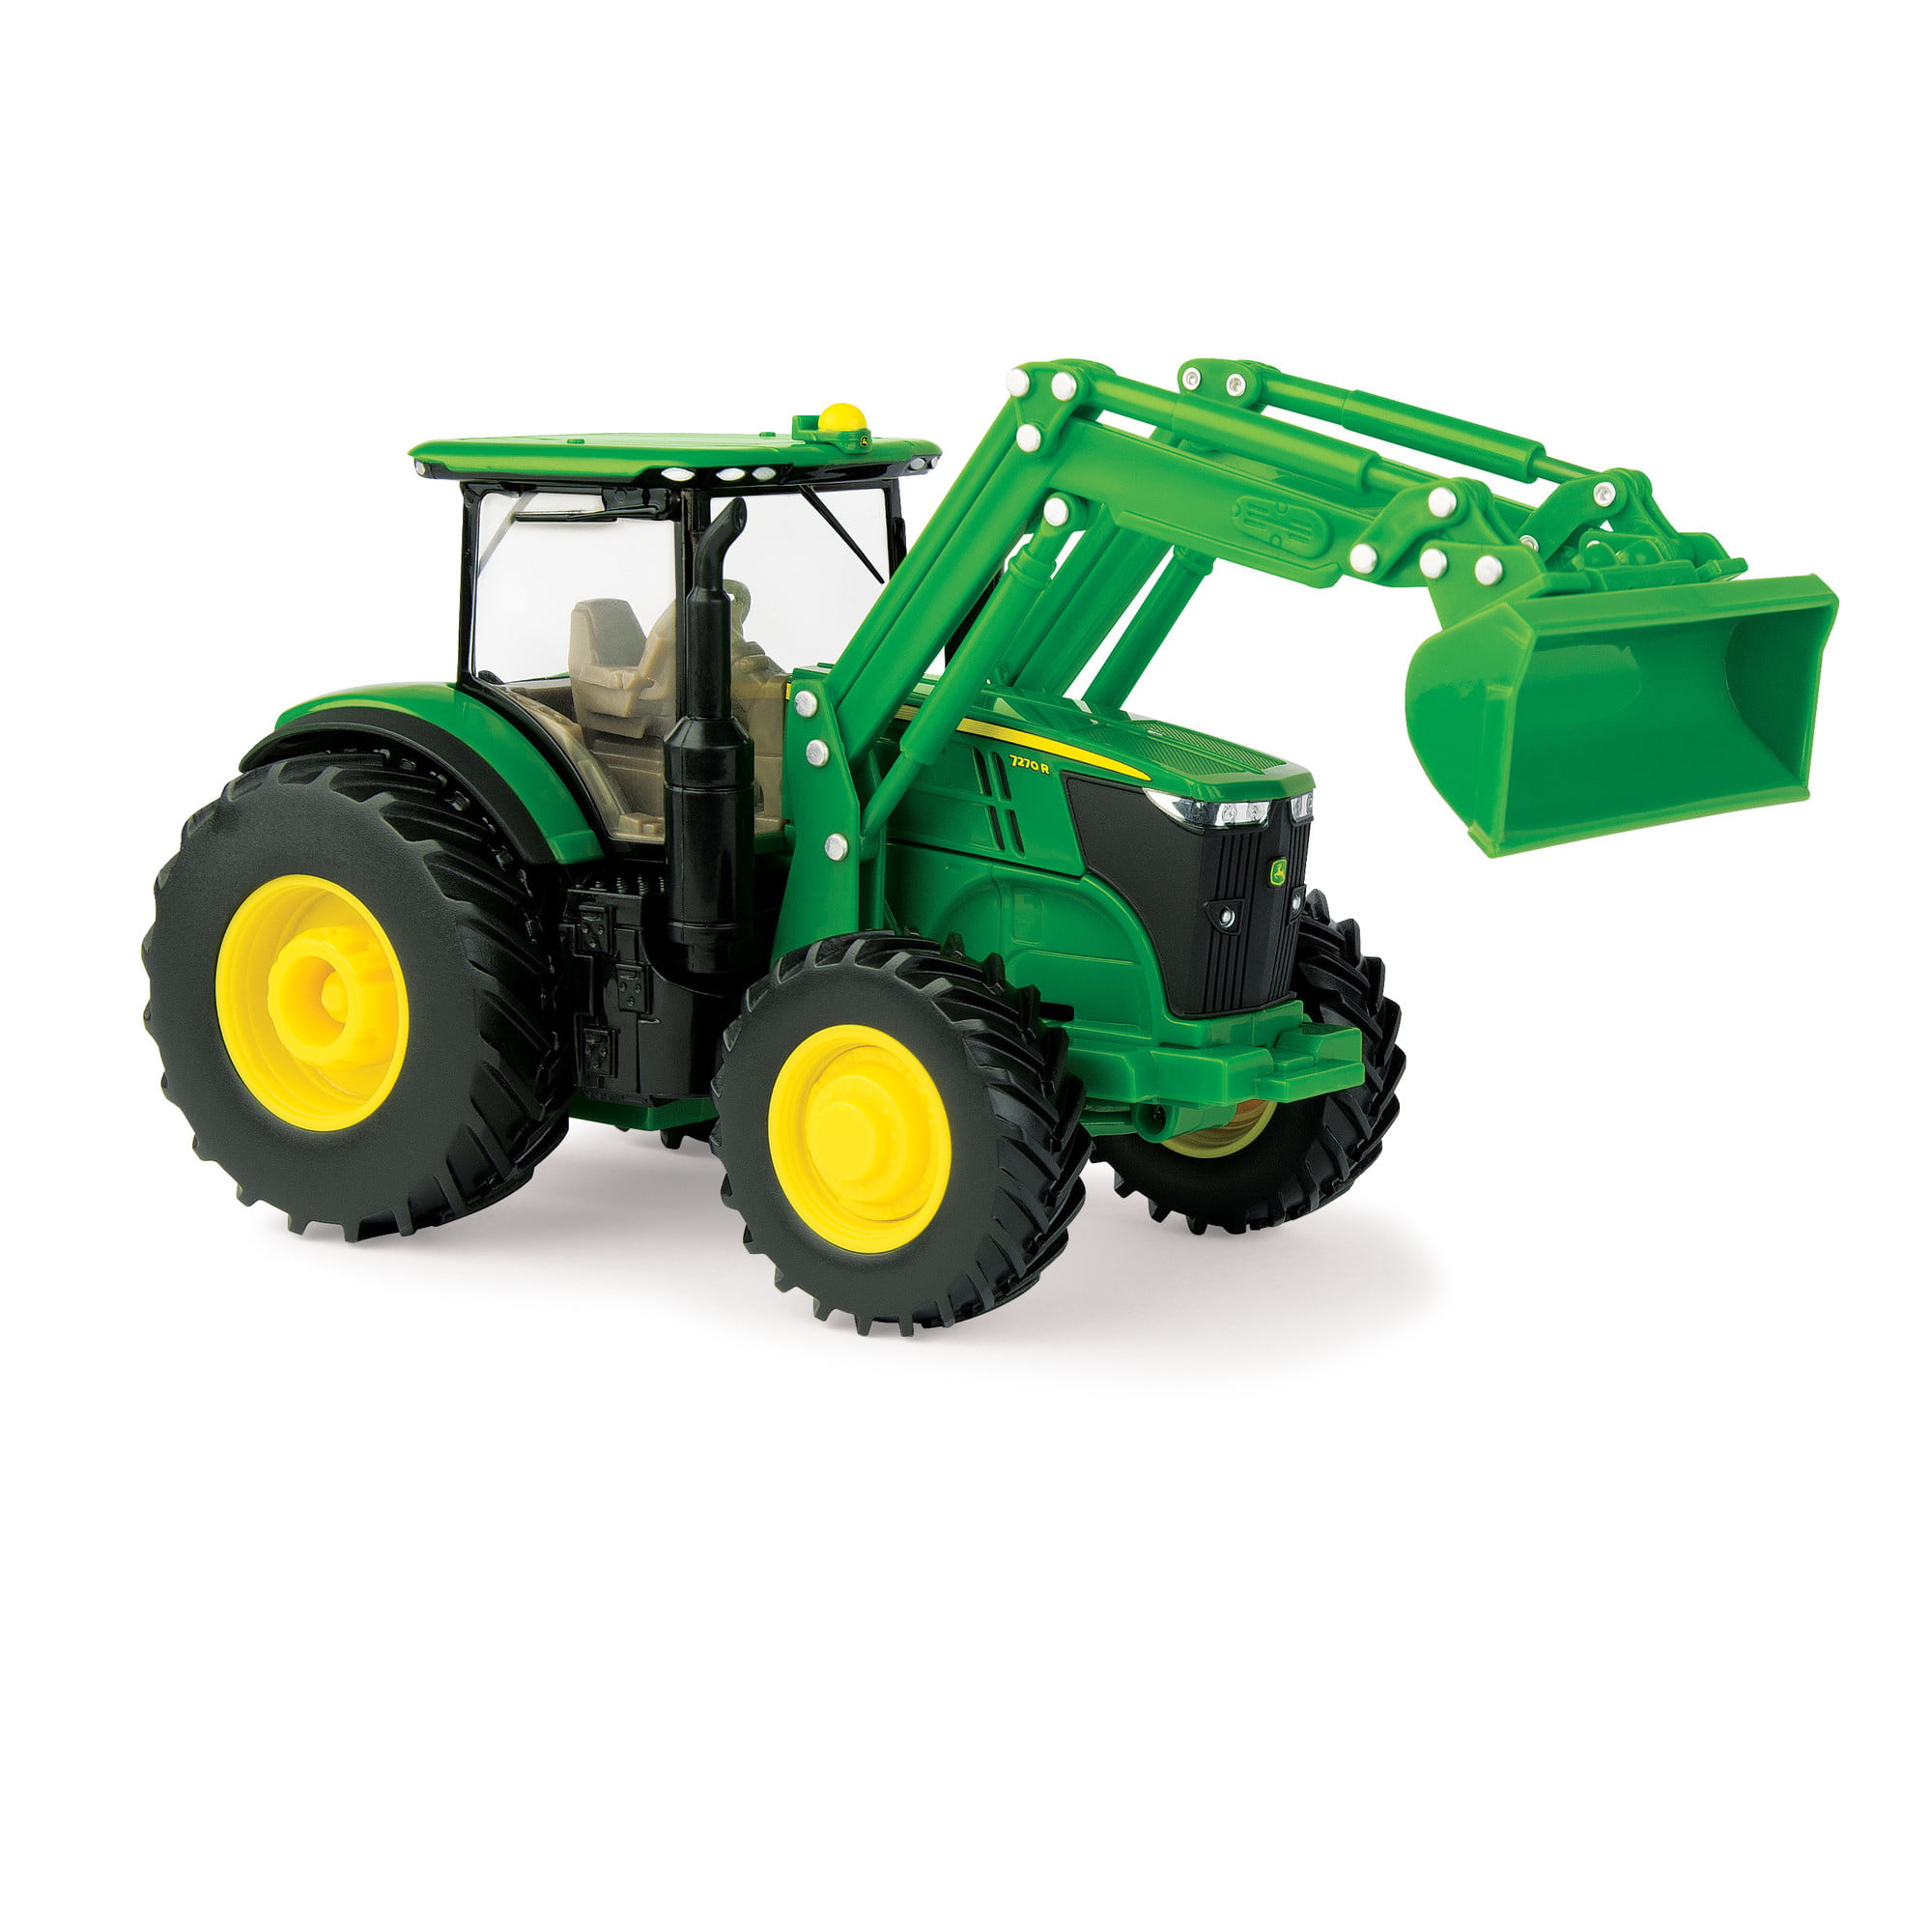 1/32 7270R Tractor with Loader LP67328 